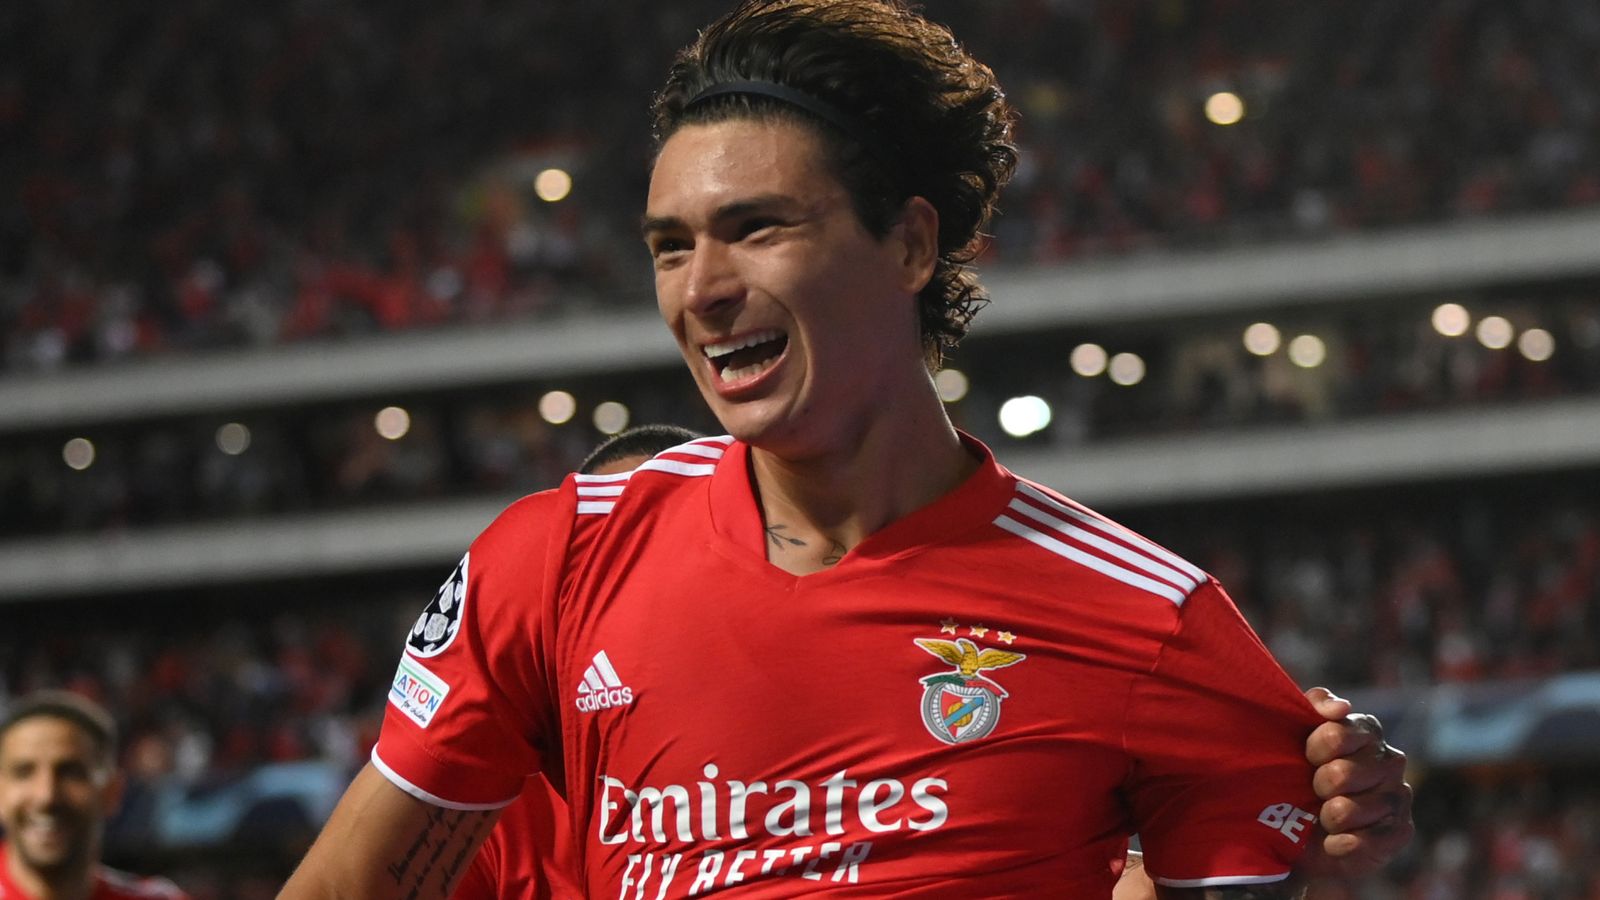 Darwin Nunez: Liverpool consider offer for Benfica forward with Manchester United also interested